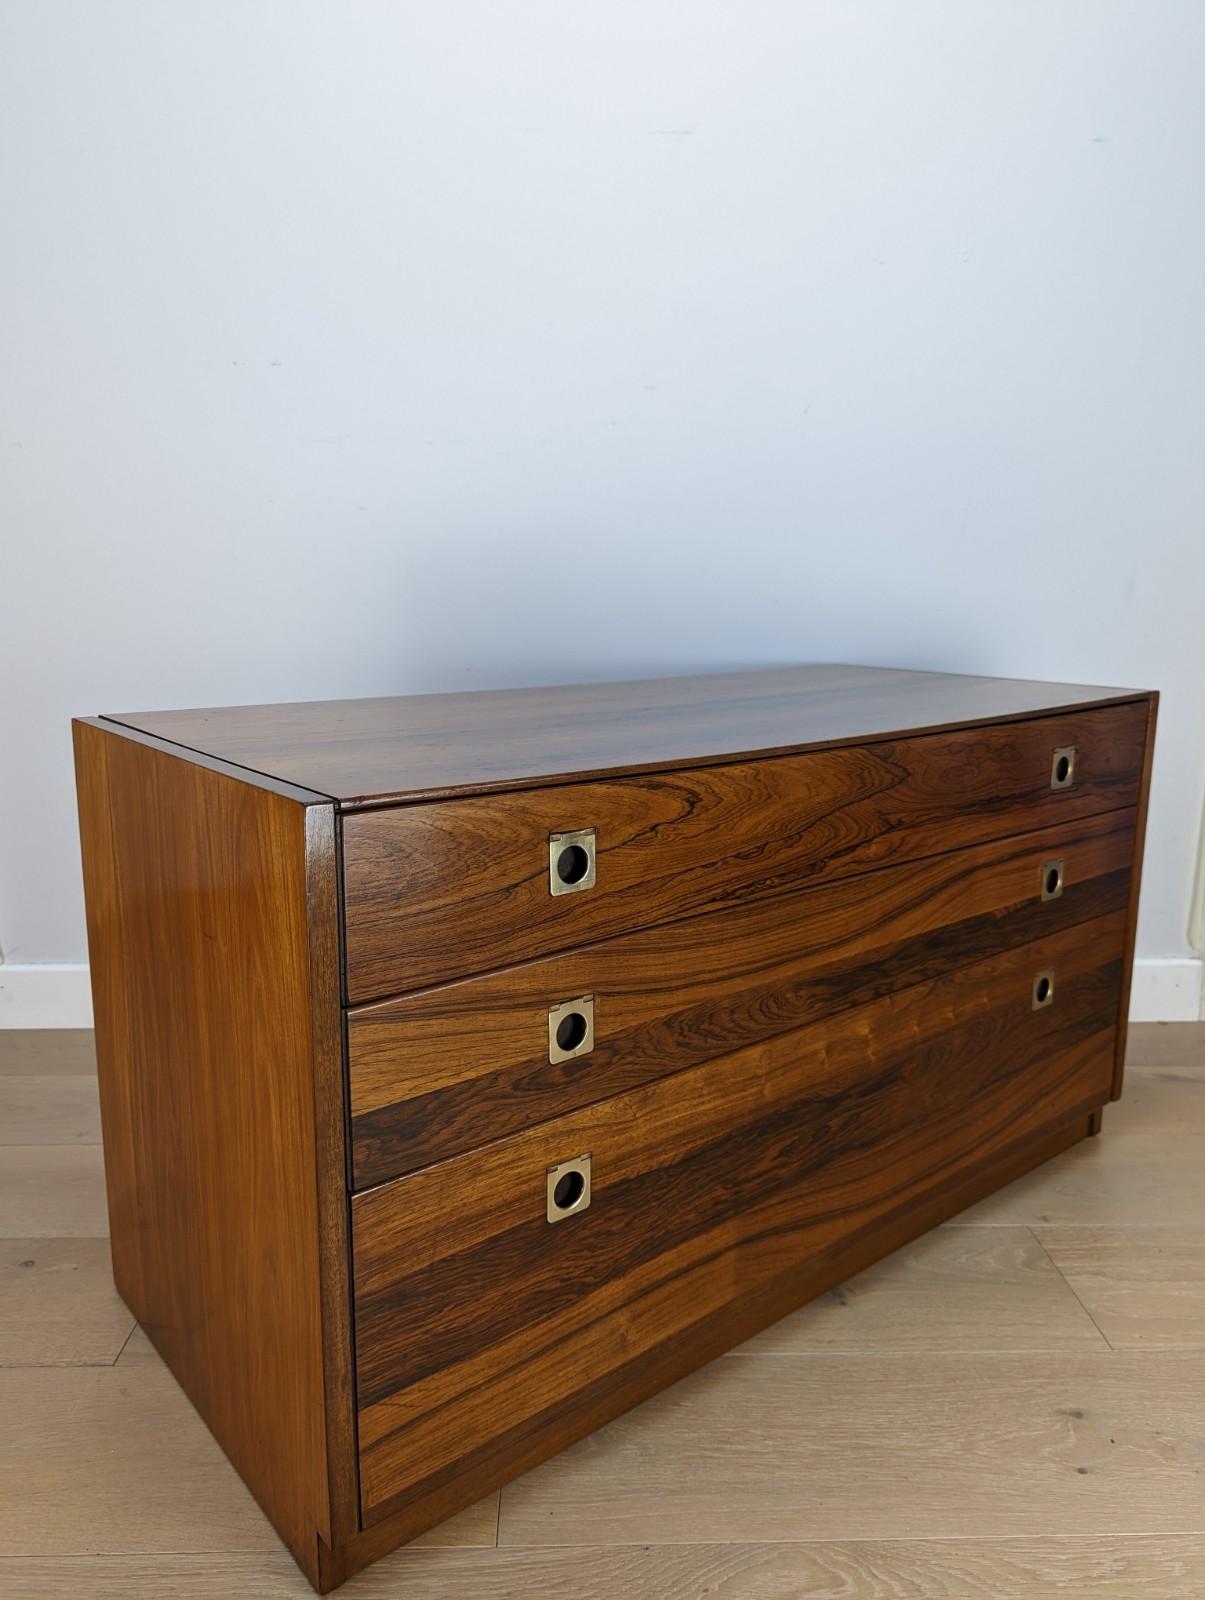 A stunning Robert Heritage for Heals of London rosewood chest of drawers

Brazilian Rosewood which has just been French polished to bring out the flare in the wood.

Made on the campaign style, this cabinet has 3 drawer drawers with brass finger